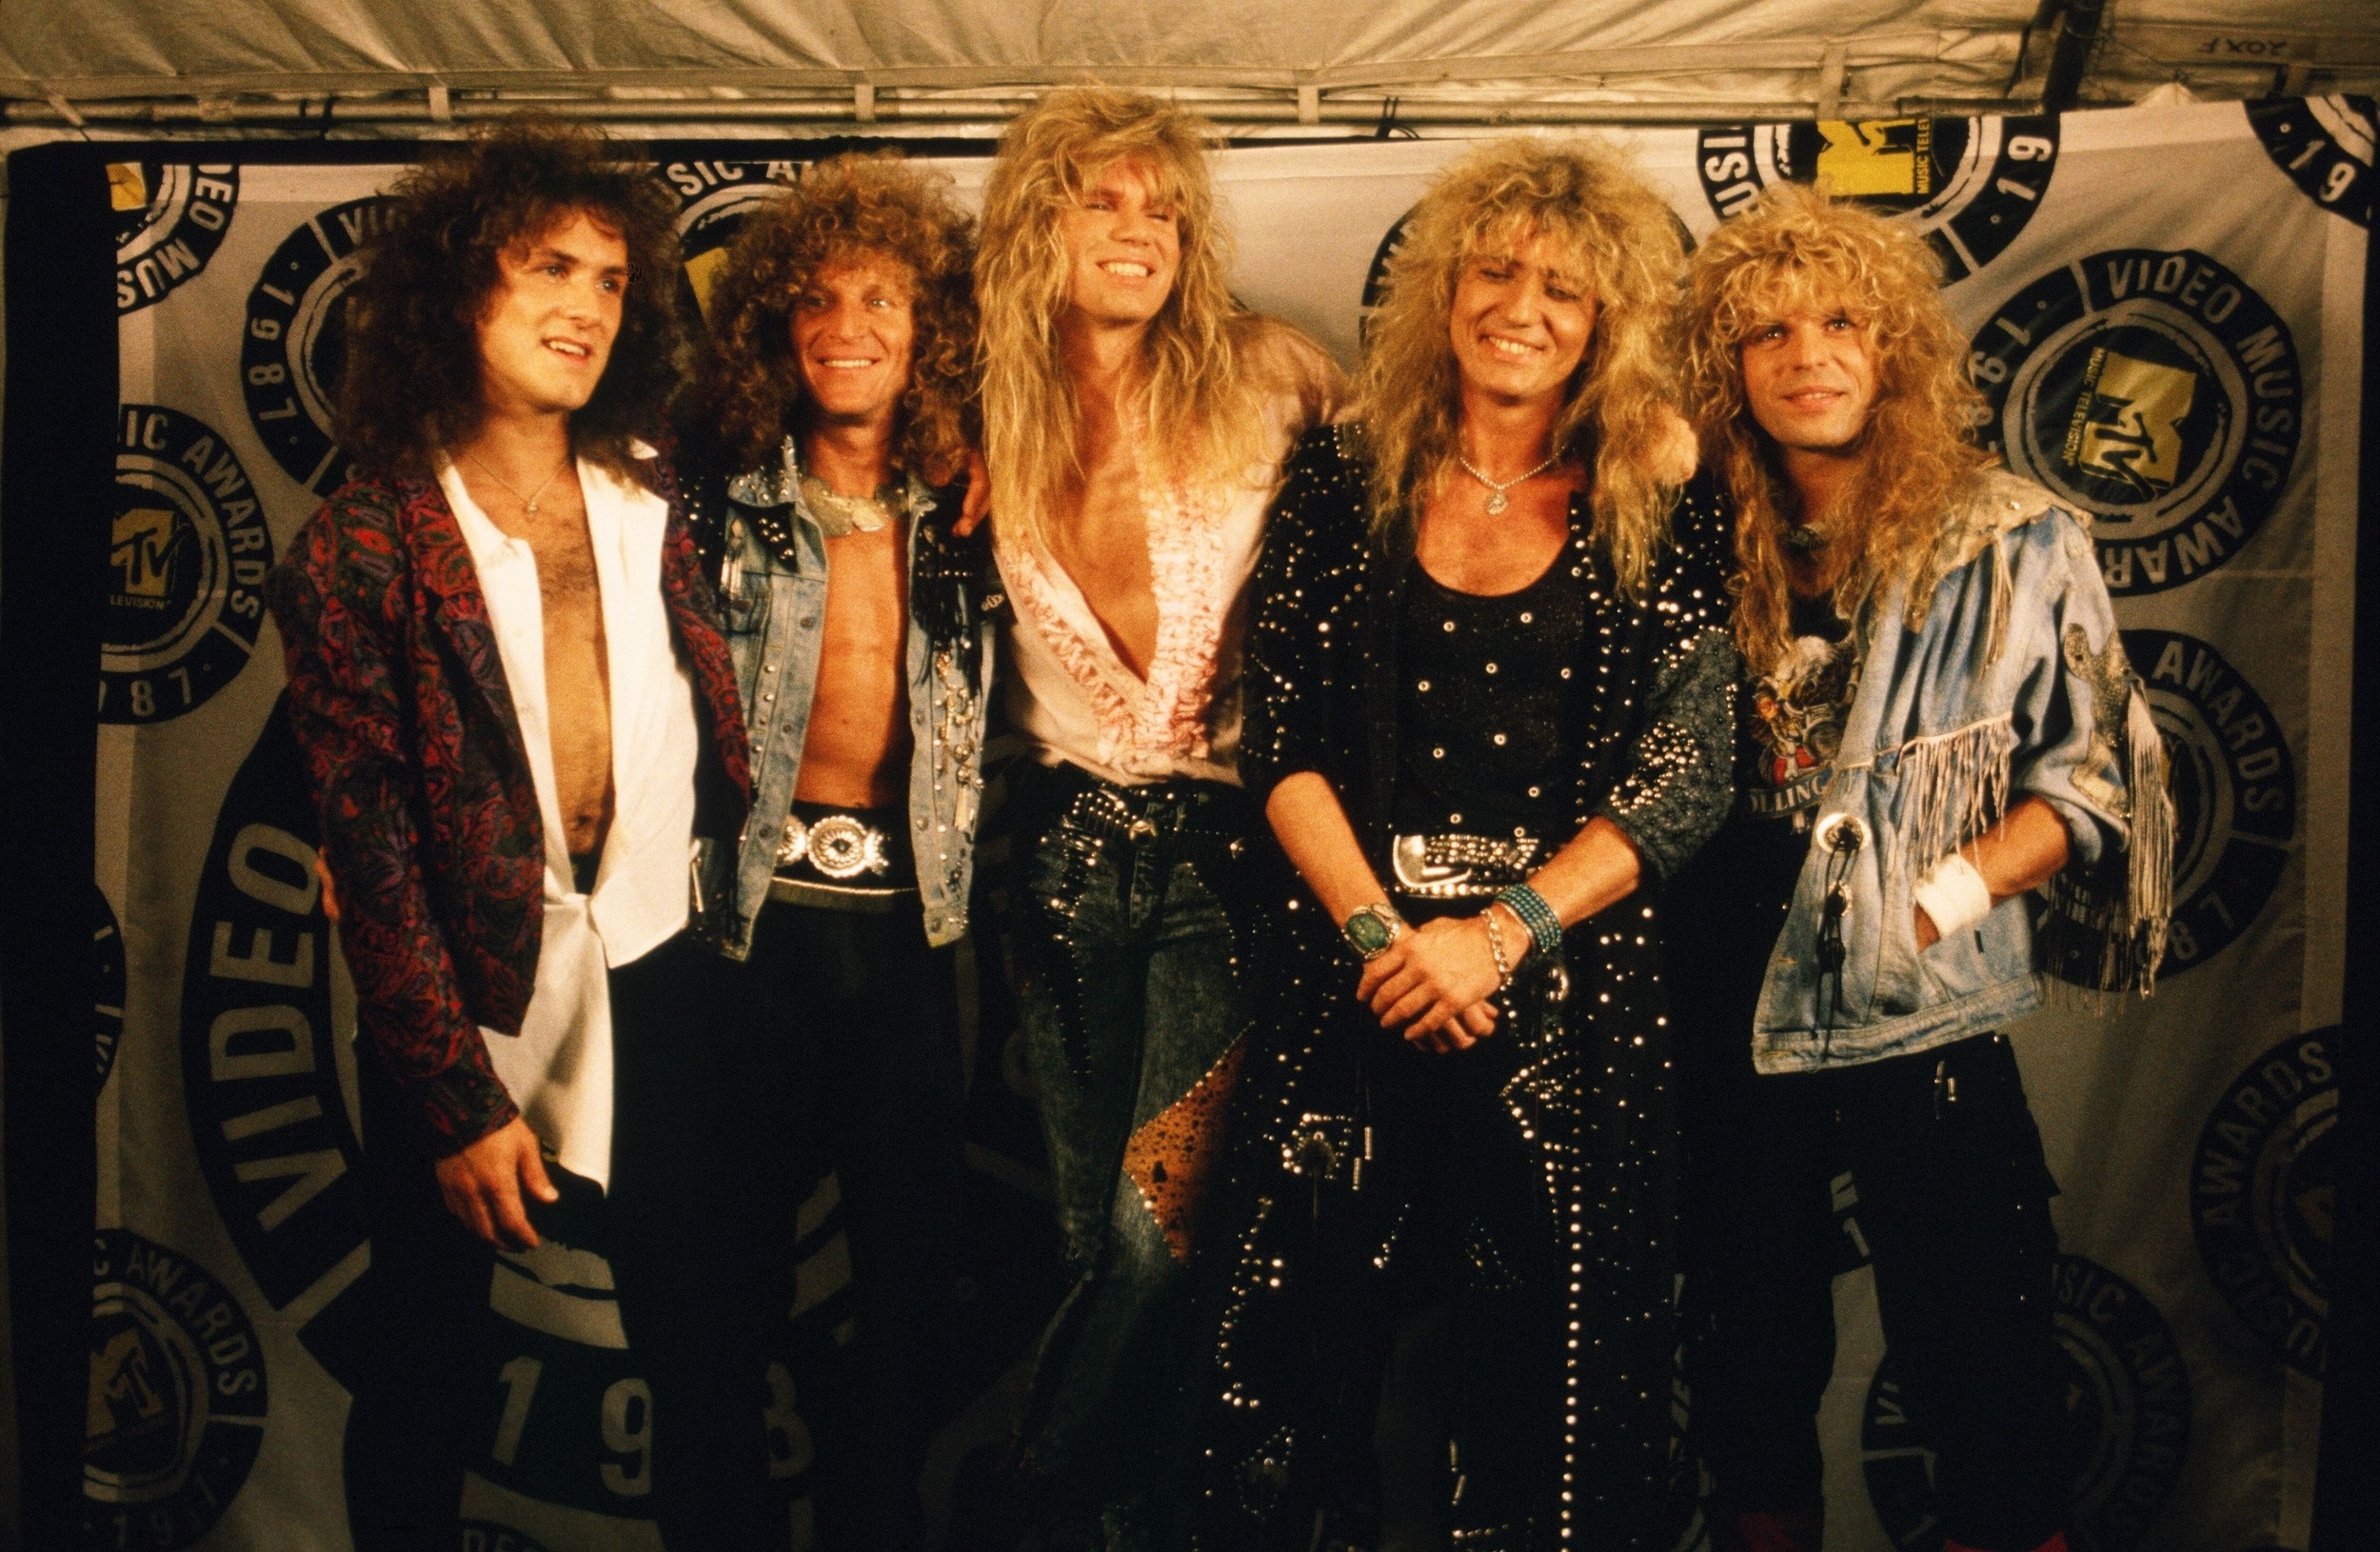 <p>The number of members who have come and gone during Whitesnake's history is bigger than the populations of some small towns. The one consistent has been frontman David Coverdale. The Deep Purple off-shoot offered a bluesy, hard-rock sound in its <a href="https://www.youtube.com/watch?v=tZ1PfB59zf8">early years</a>. However, on the band's <a href="https://www.youtube.com/watch?v=WyF8RHM1OCg">breakout self-titled 1987 release</a>, which featured veteran John Sykes on guitar and '80s hair-metal staples Adrian Vandenberg and, eventually, Rudy Sarzo, its image and overall sound fit in more with the glam metal movement of the day. Also, working with famed A&R exec John Kalodner (Aerosmith, Sammy Hagar, Cher) to make the group a more mainstream commodity can't be understated. </p><p><a href='https://www.msn.com/en-us/community/channel/vid-cj9pqbr0vn9in2b6ddcd8sfgpfq6x6utp44fssrv6mc2gtybw0us'>Did you enjoy this slideshow? Follow us on MSN to see more of our exclusive entertainment content.</a></p>